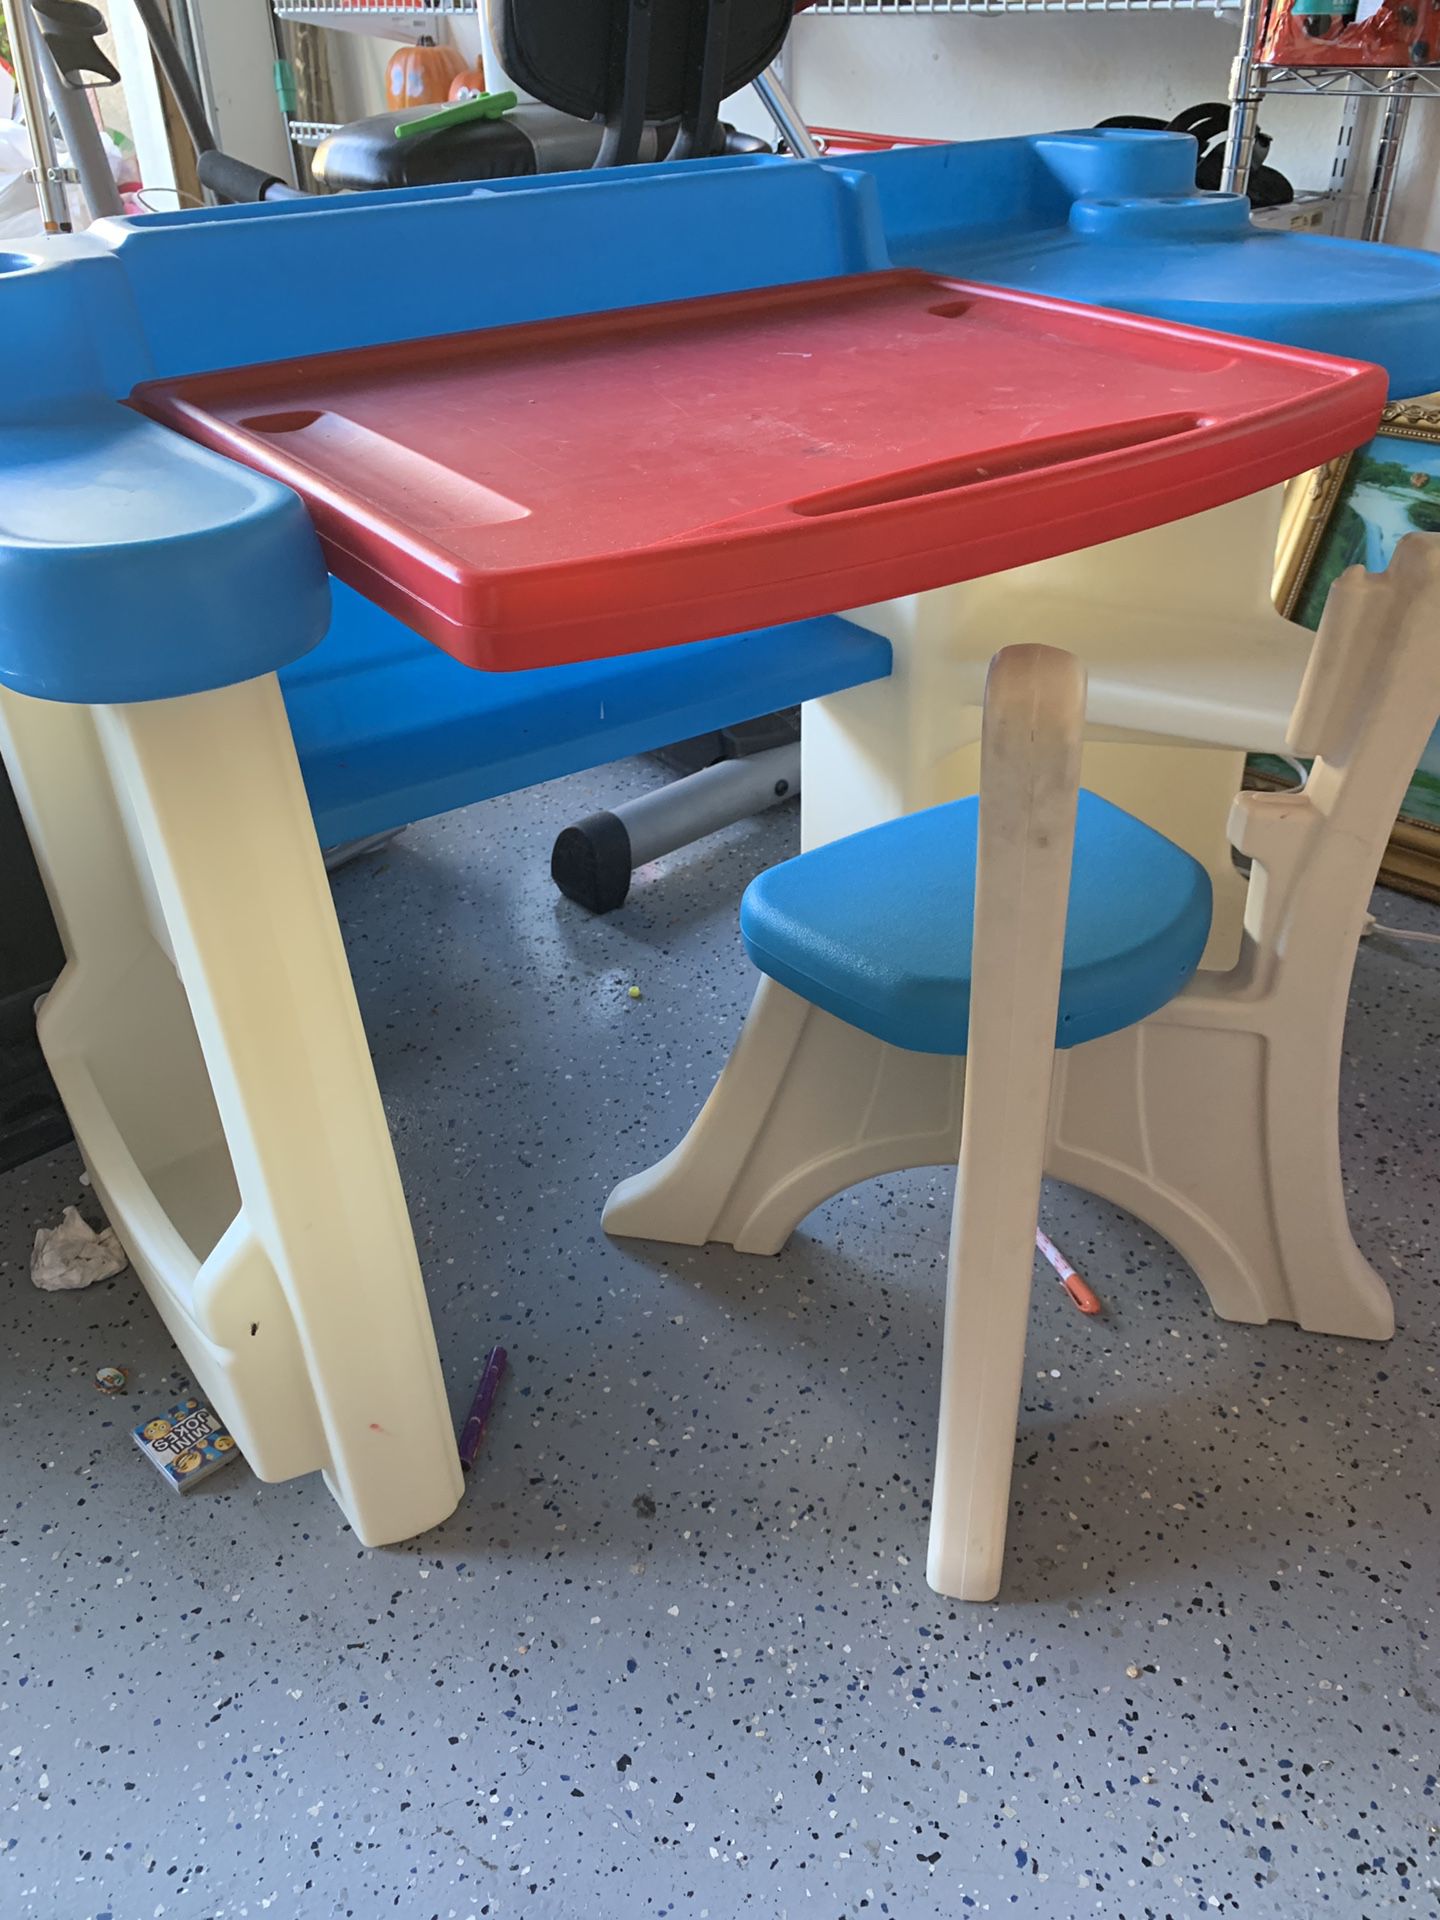 Kids study desk with chair